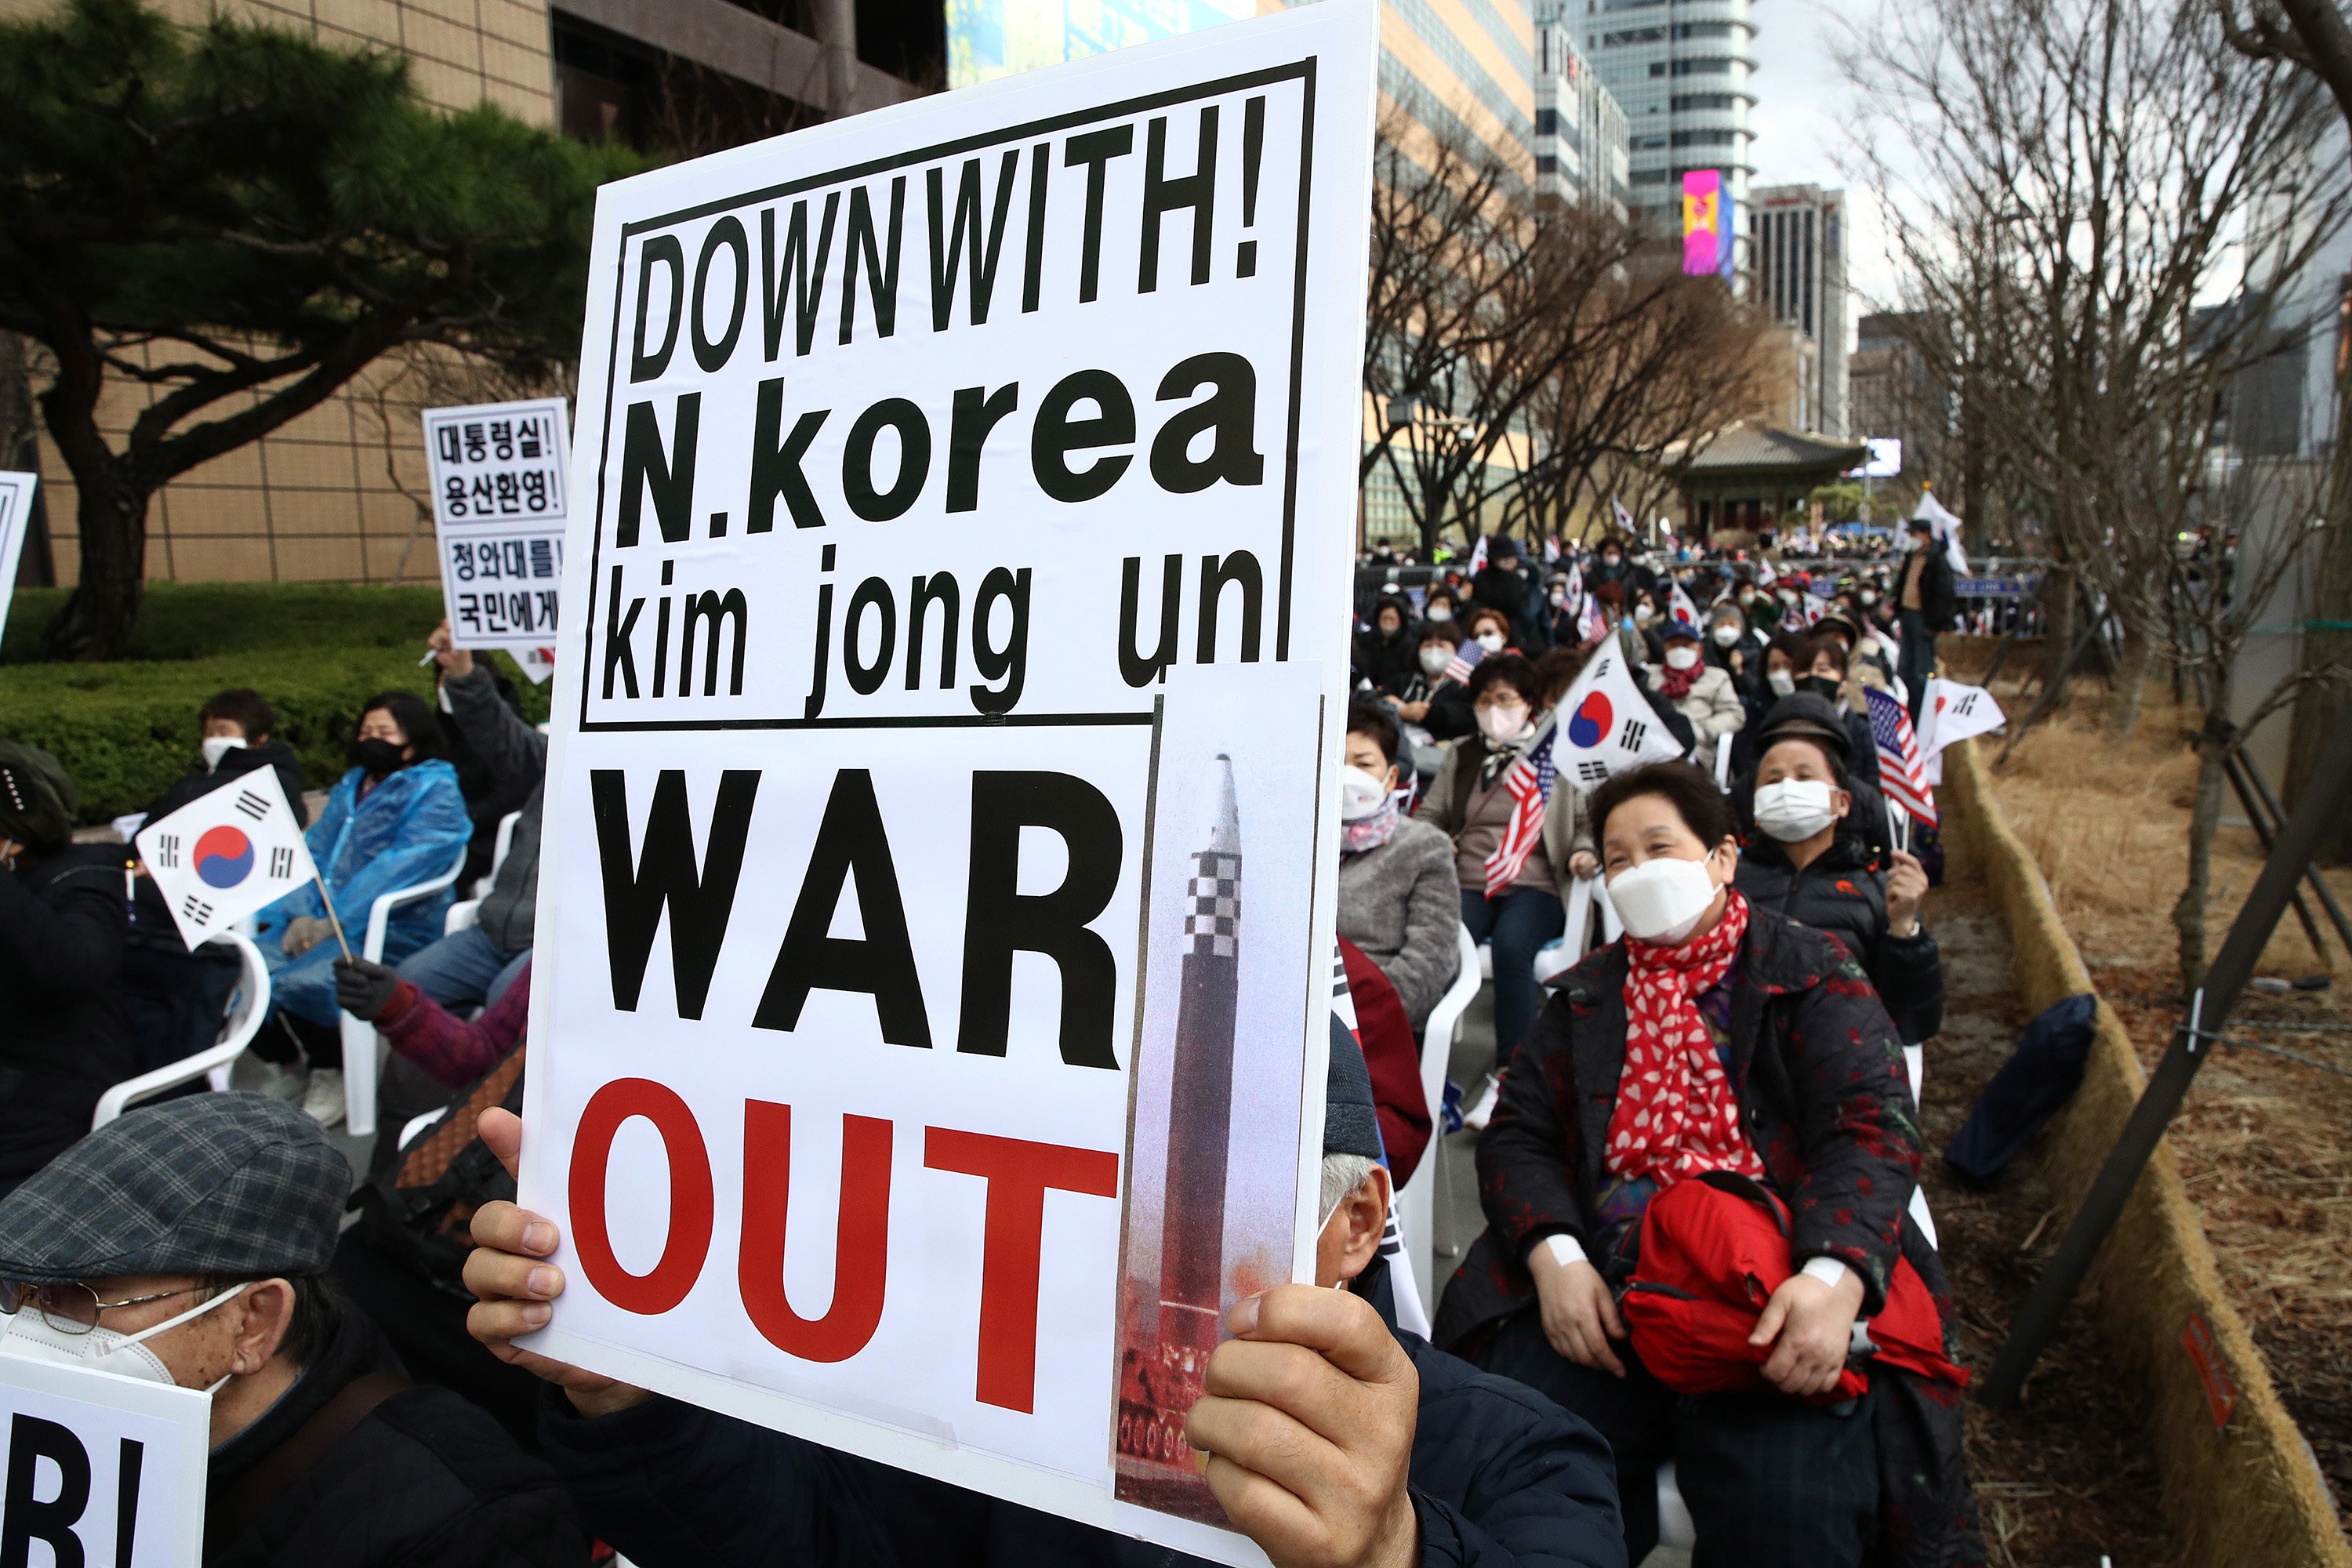 Protesters rally against North Korea’s intercontinental ballistic missile launch on March 26 in Seoul, South Korea. The ICBM, fired towards the East Sea, sharply escalated tensions in the region. Photo: TNS